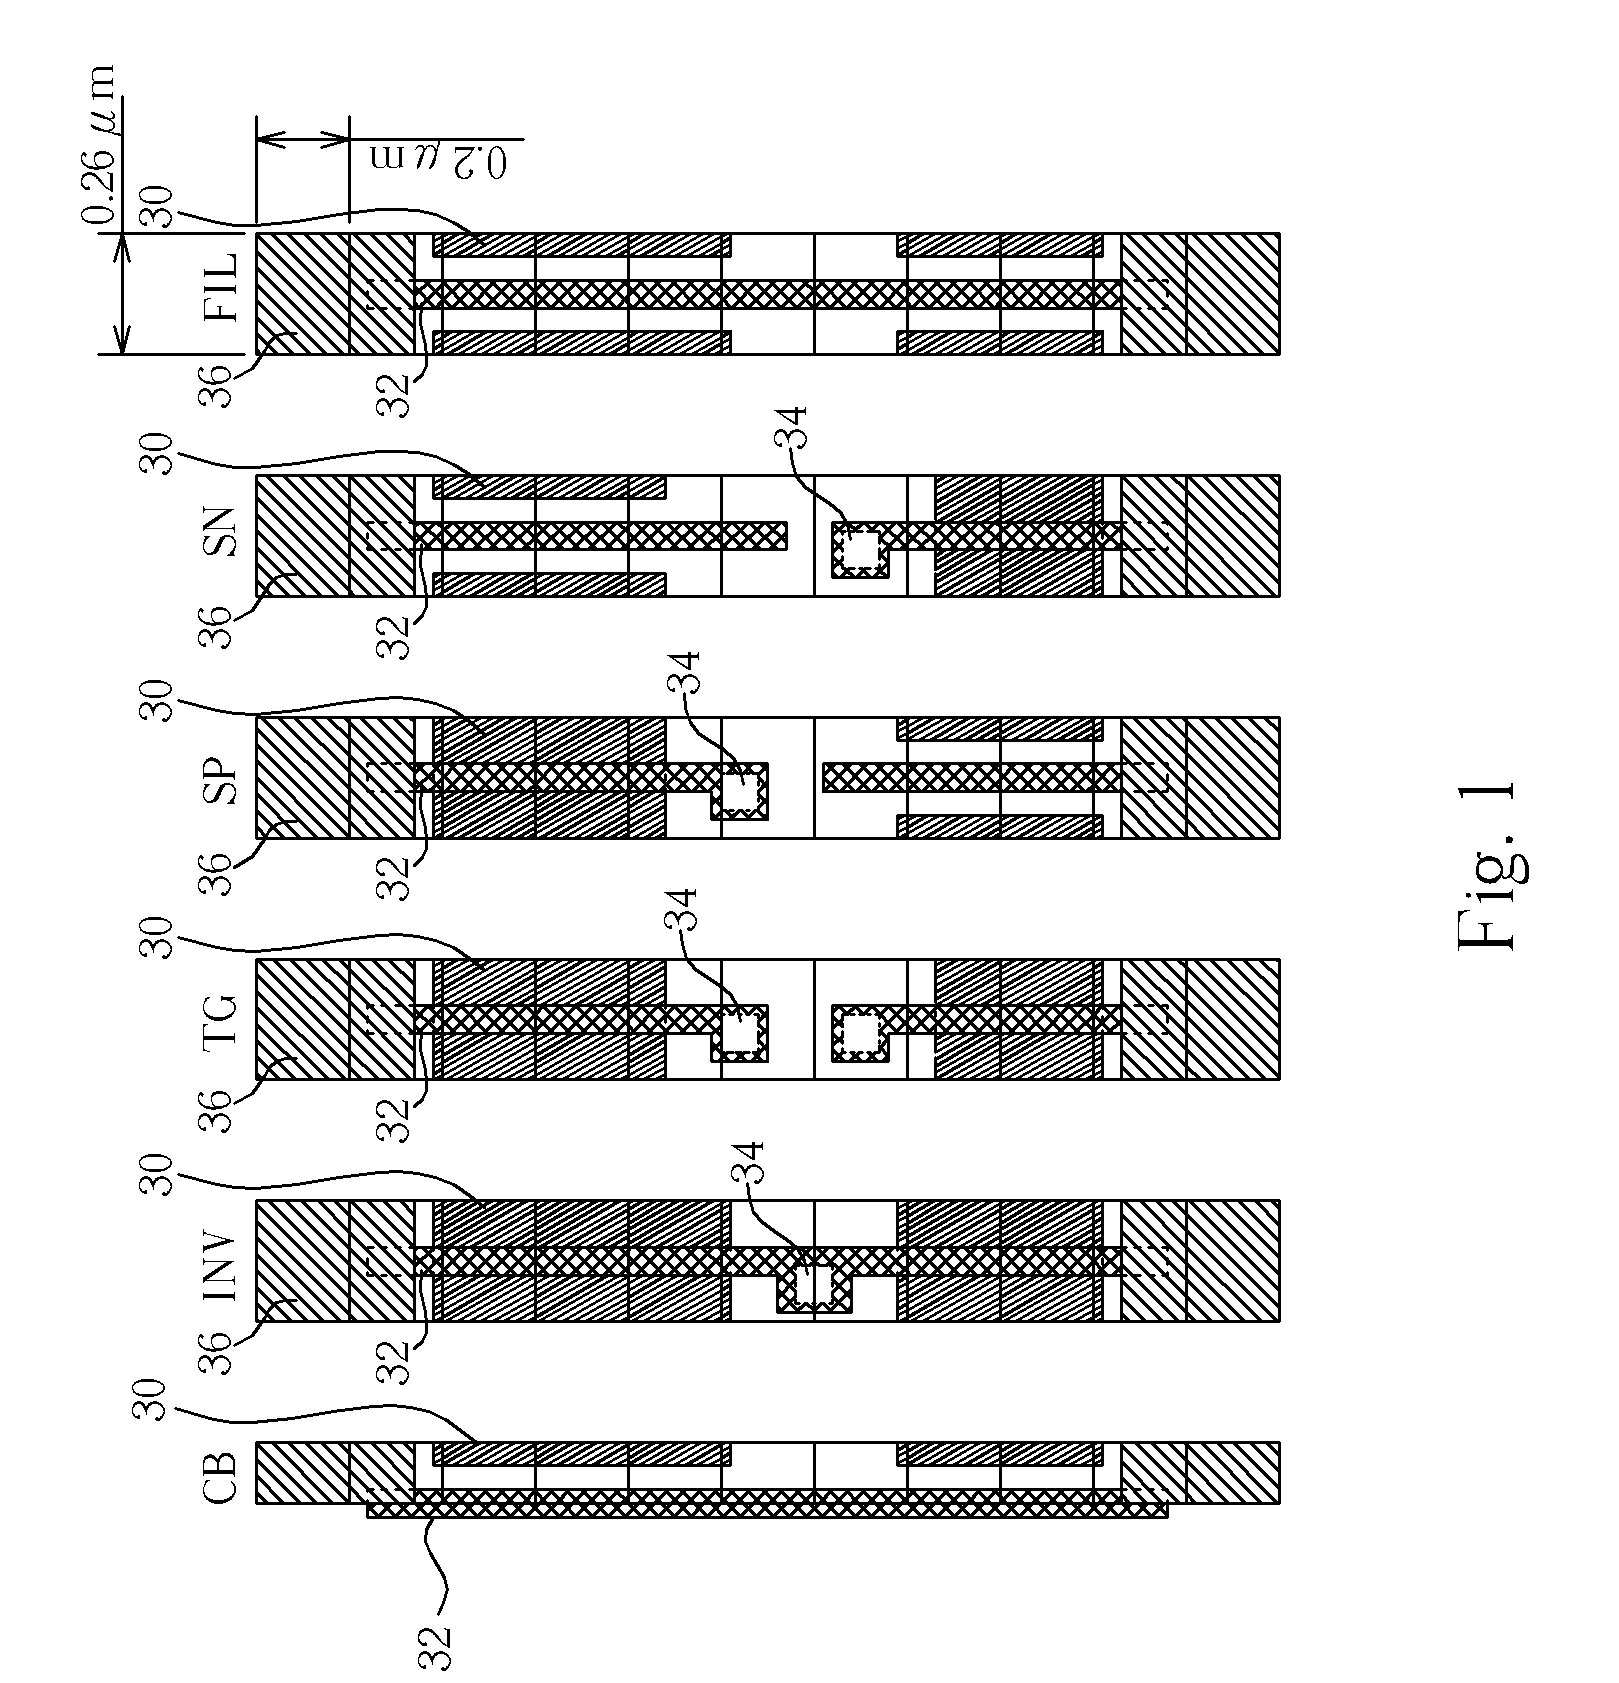 Method of generating a standard cell layout